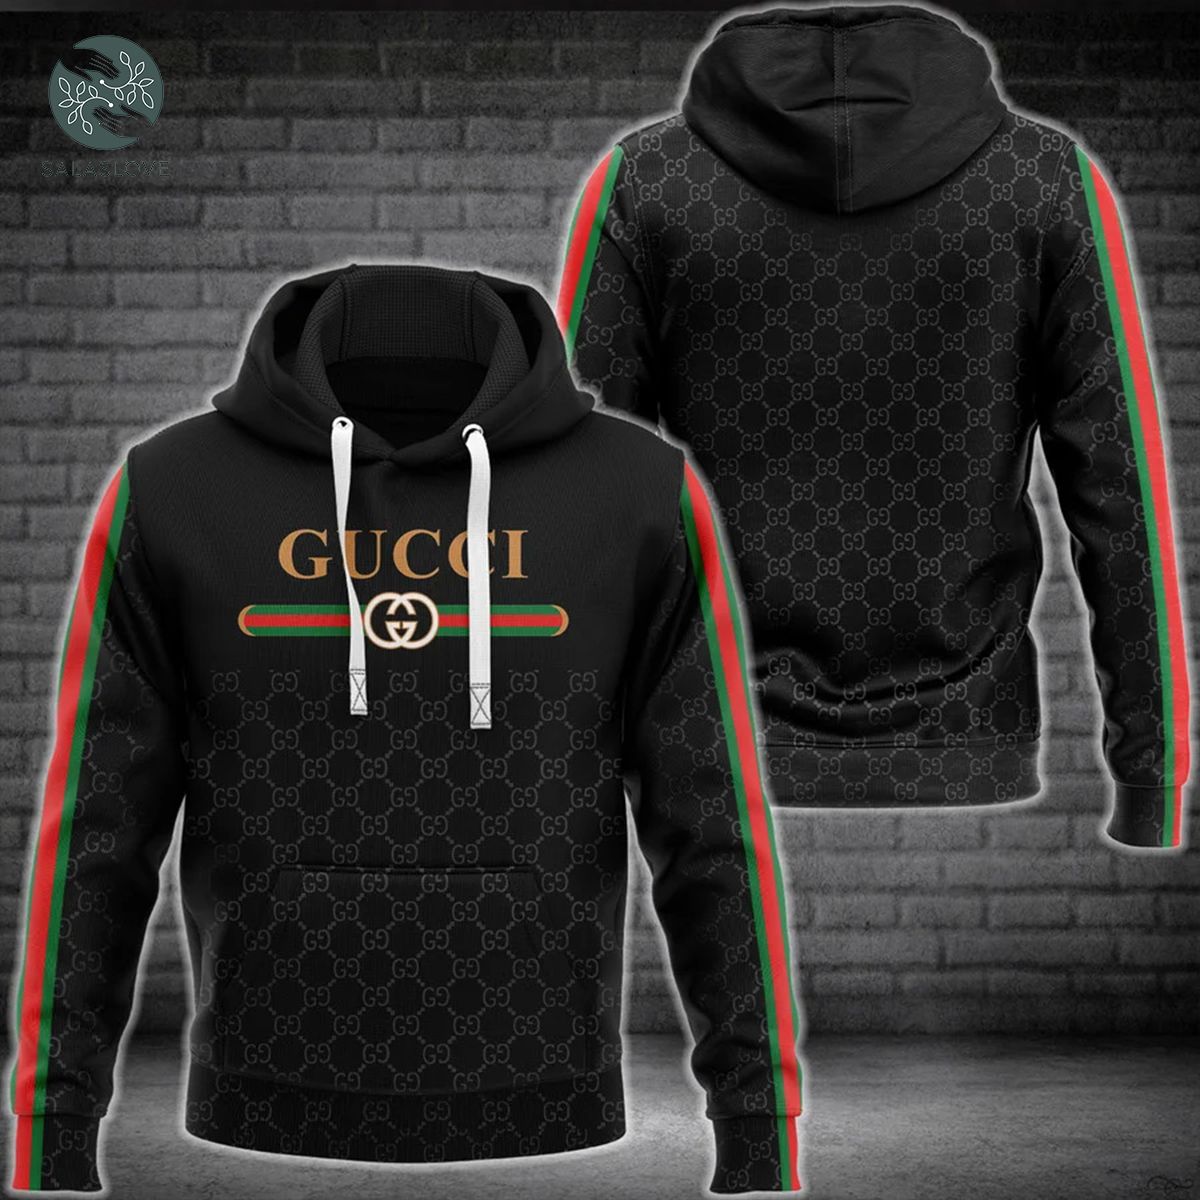 Gucci Stripe Hoodie For Men Women Luxury Brand Outfit